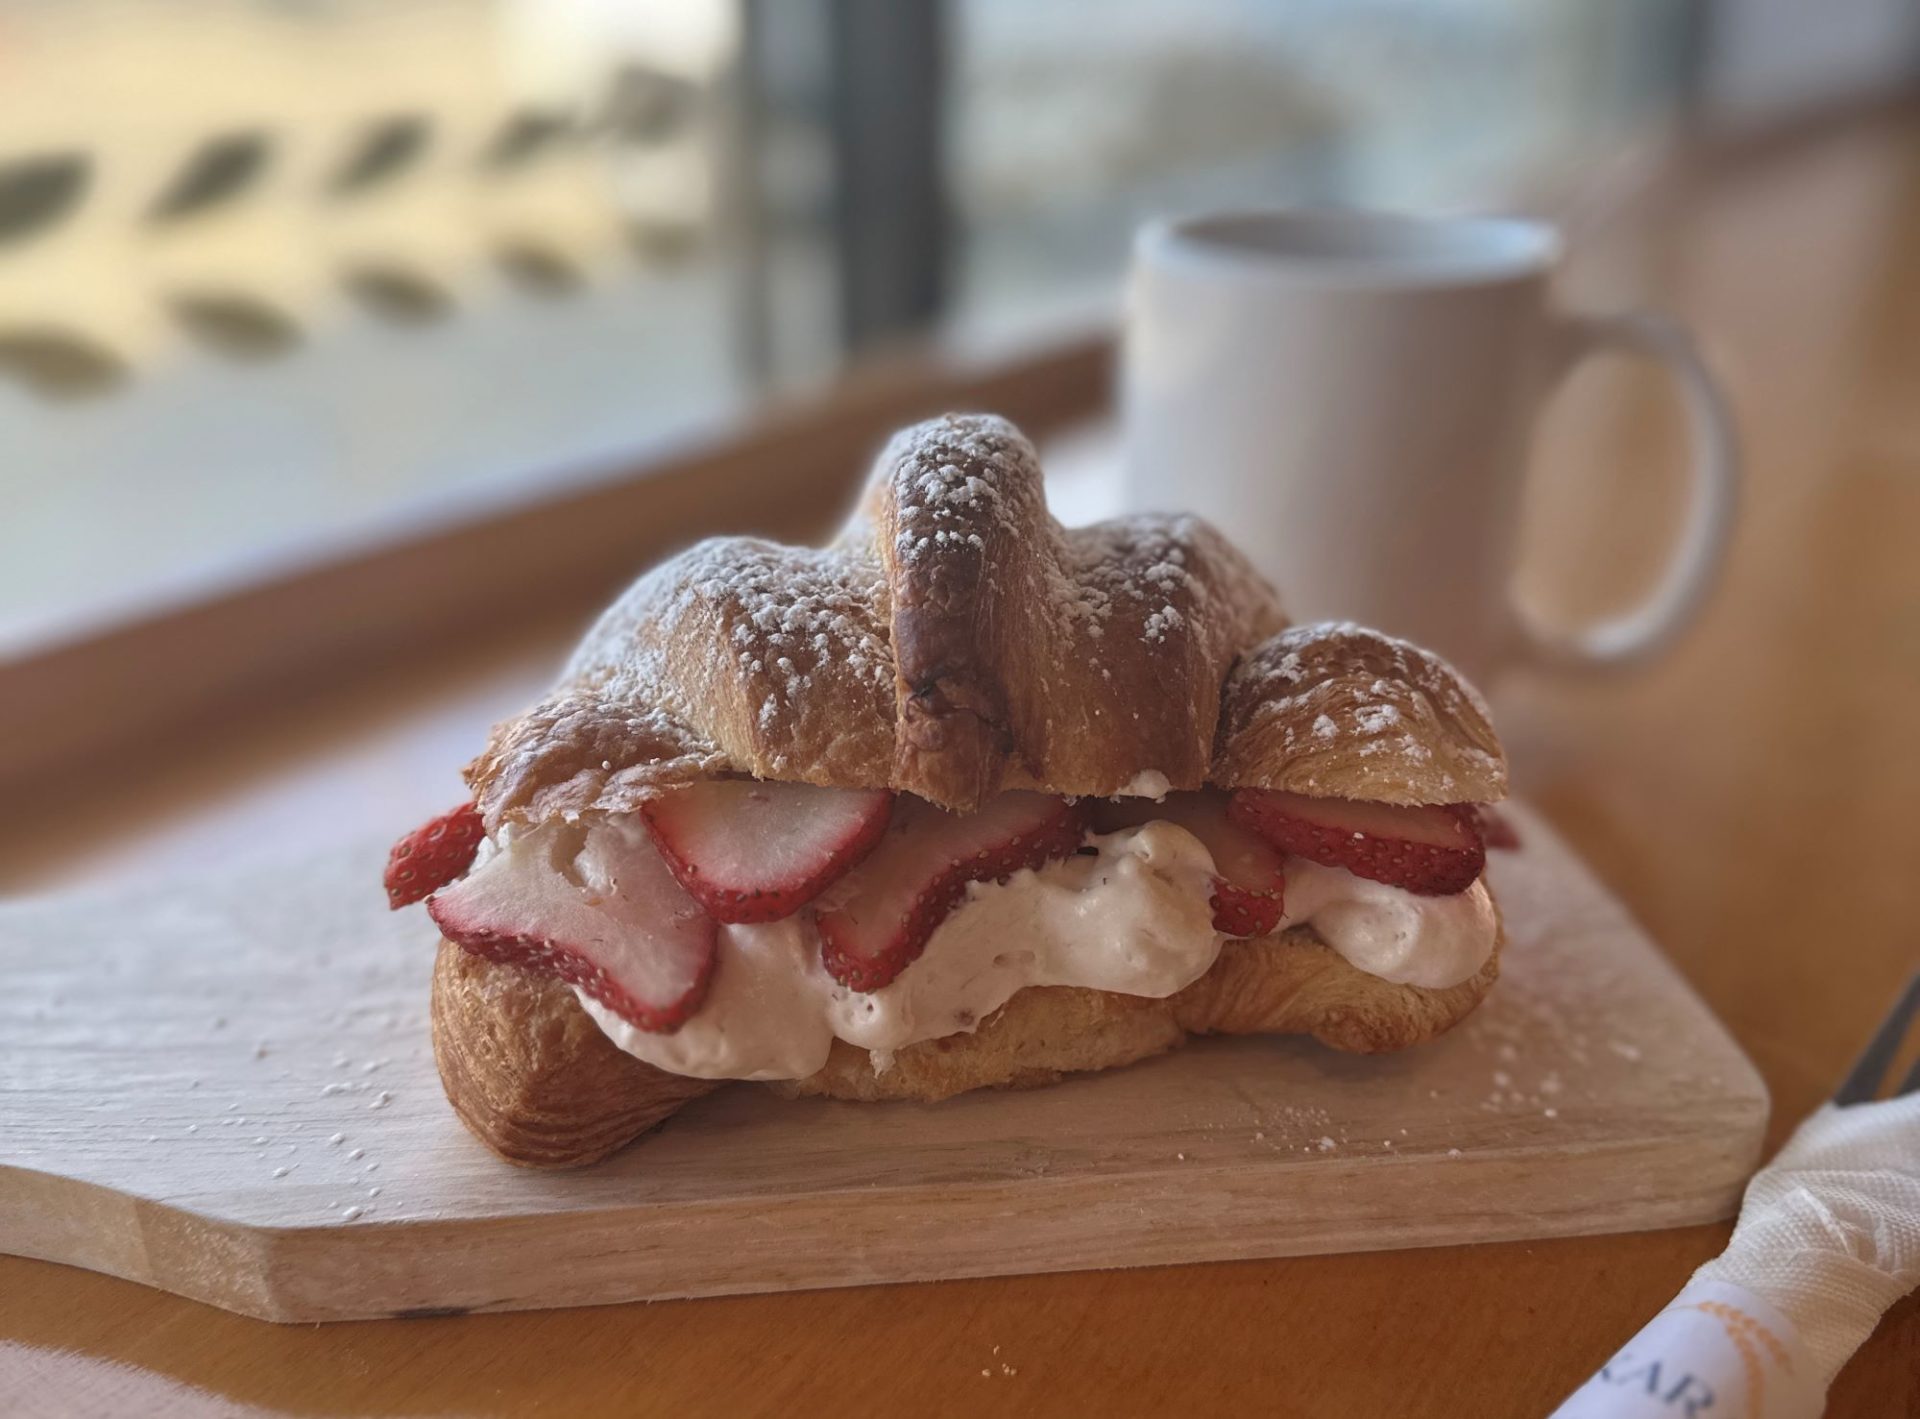 A croissant with a layer of strawberries and marscapone in the center, sitting on a wooden block. A white mug of coffee is in the background.